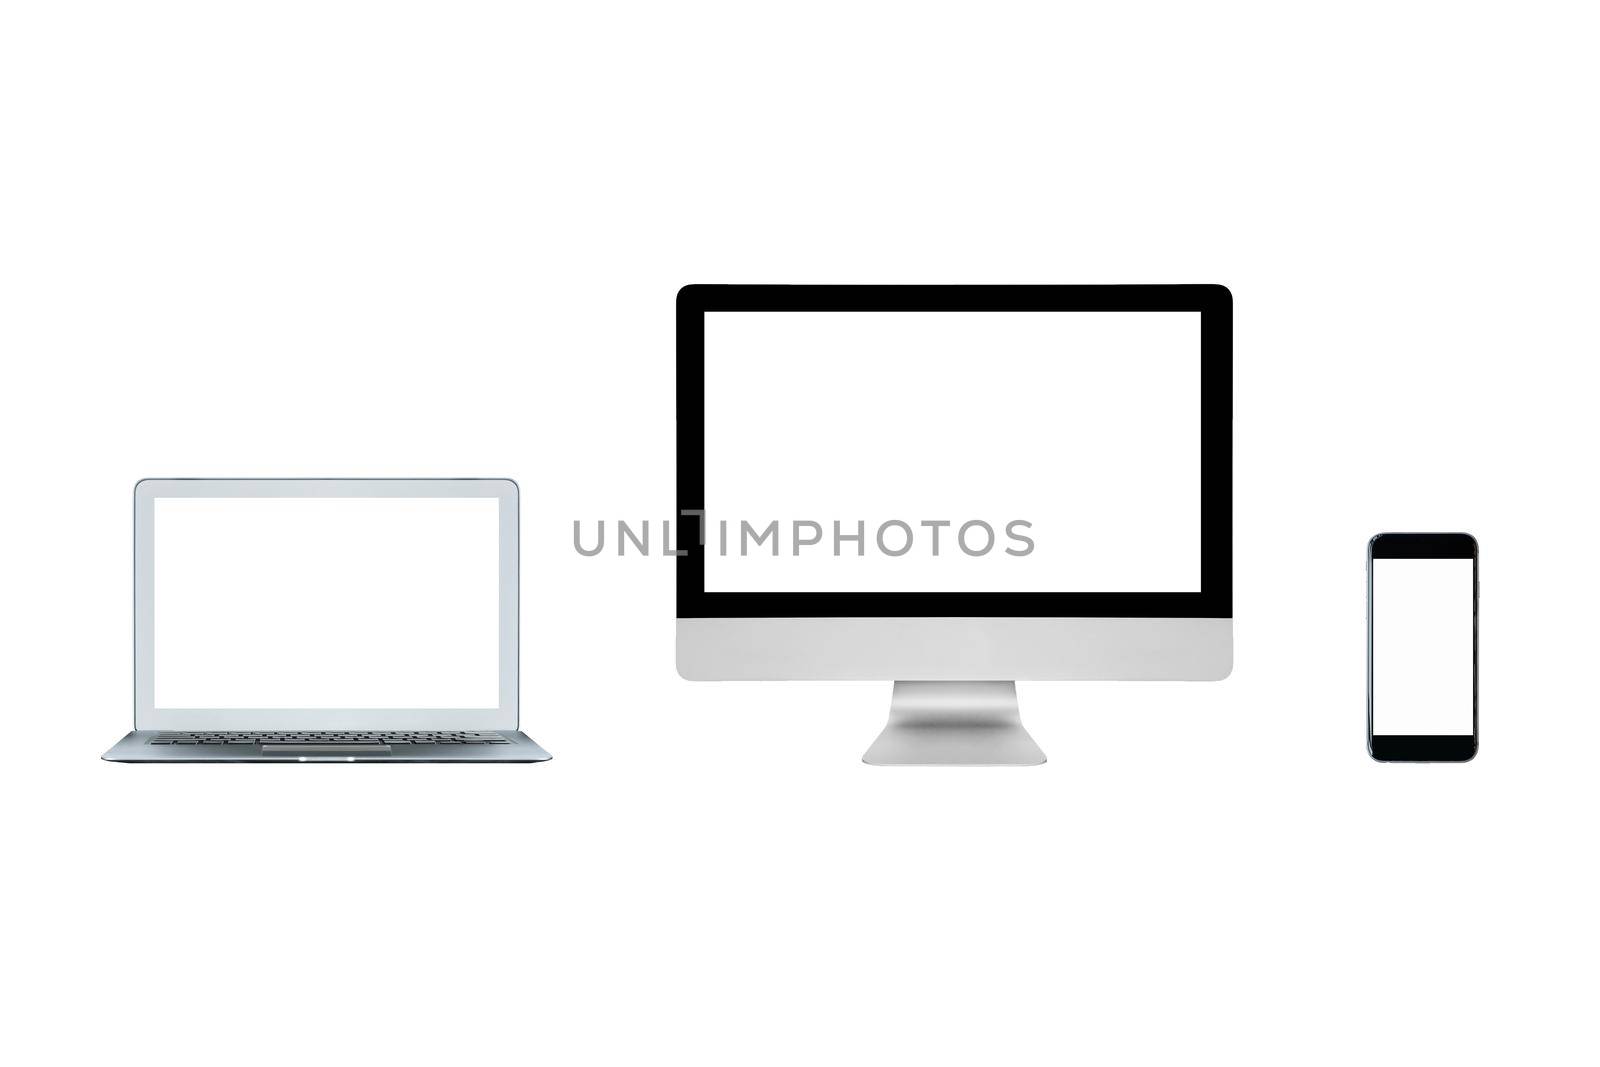 Smart modern computer PC,Laptop and smartphone with blank screen isolated on white background.Photo design for smart technology and internet of things concept.